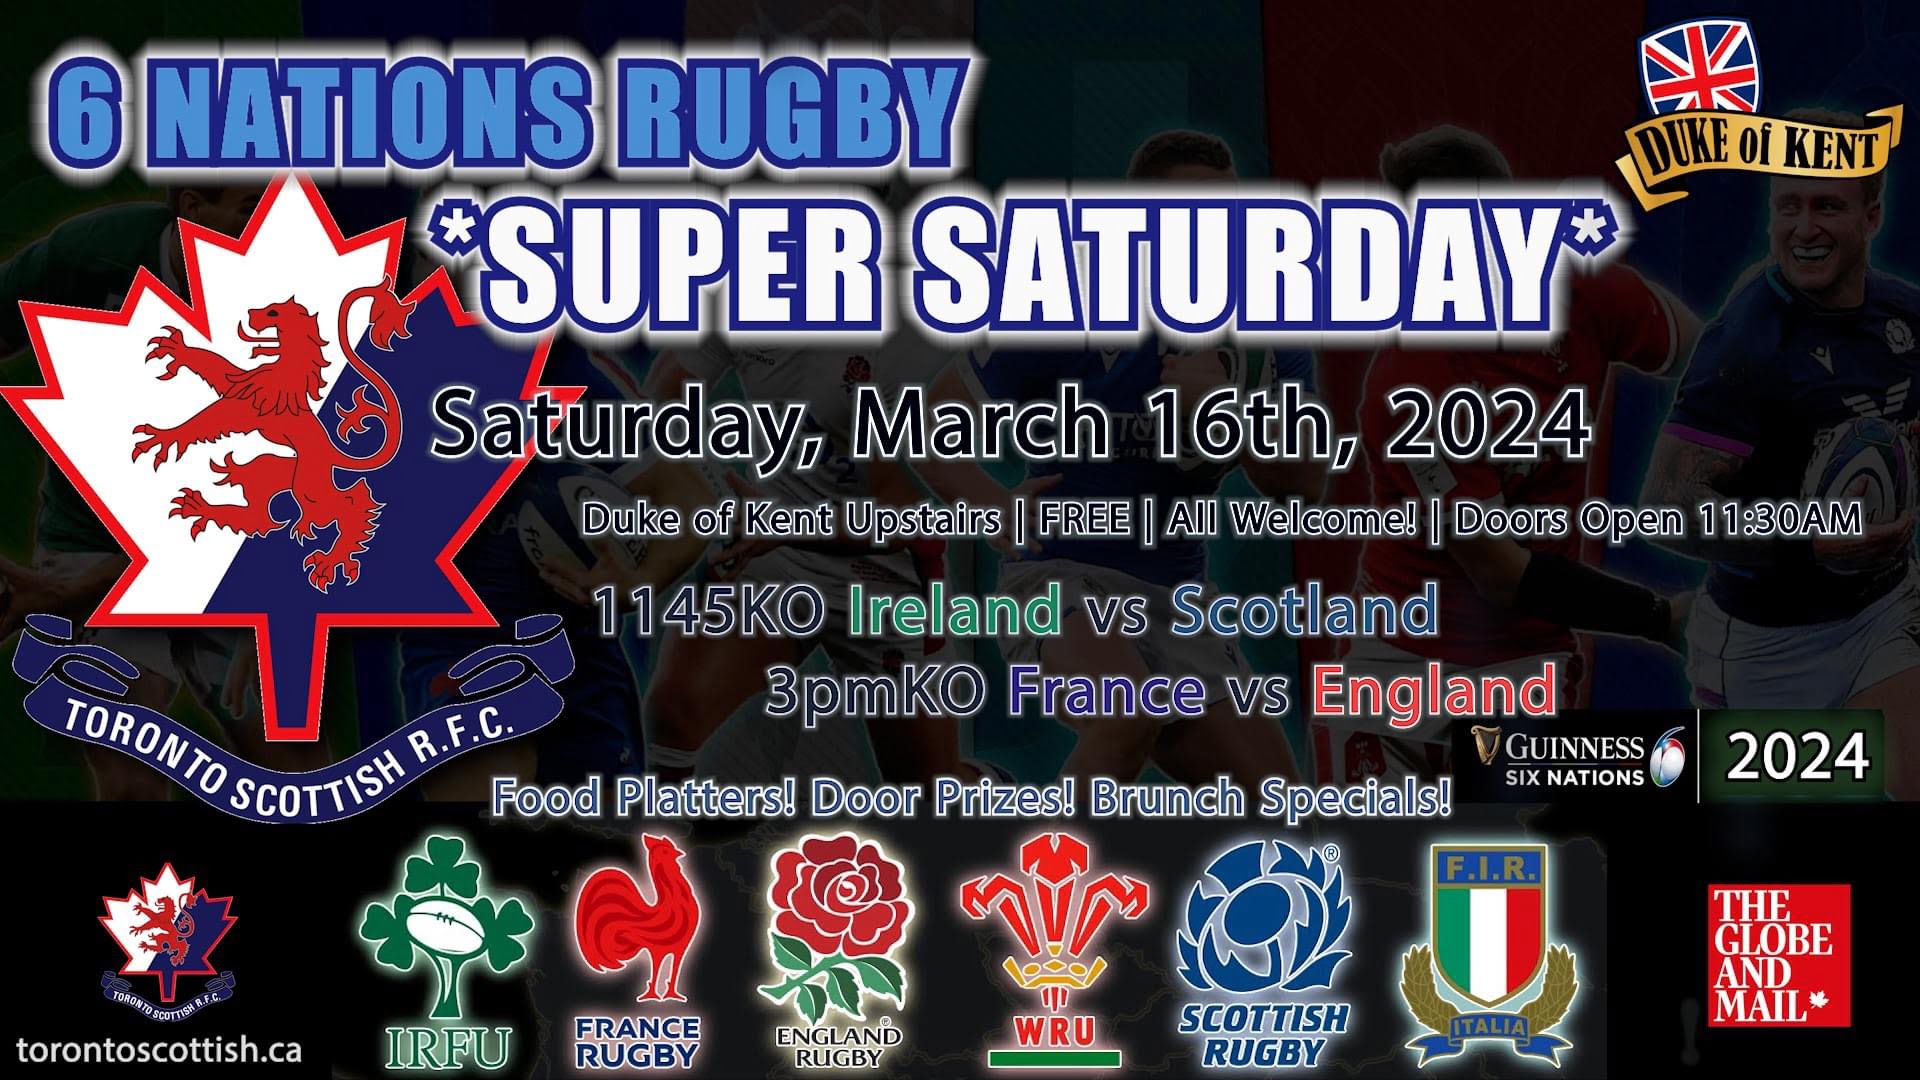 6 Nations SUPER SATURDAY viewing party